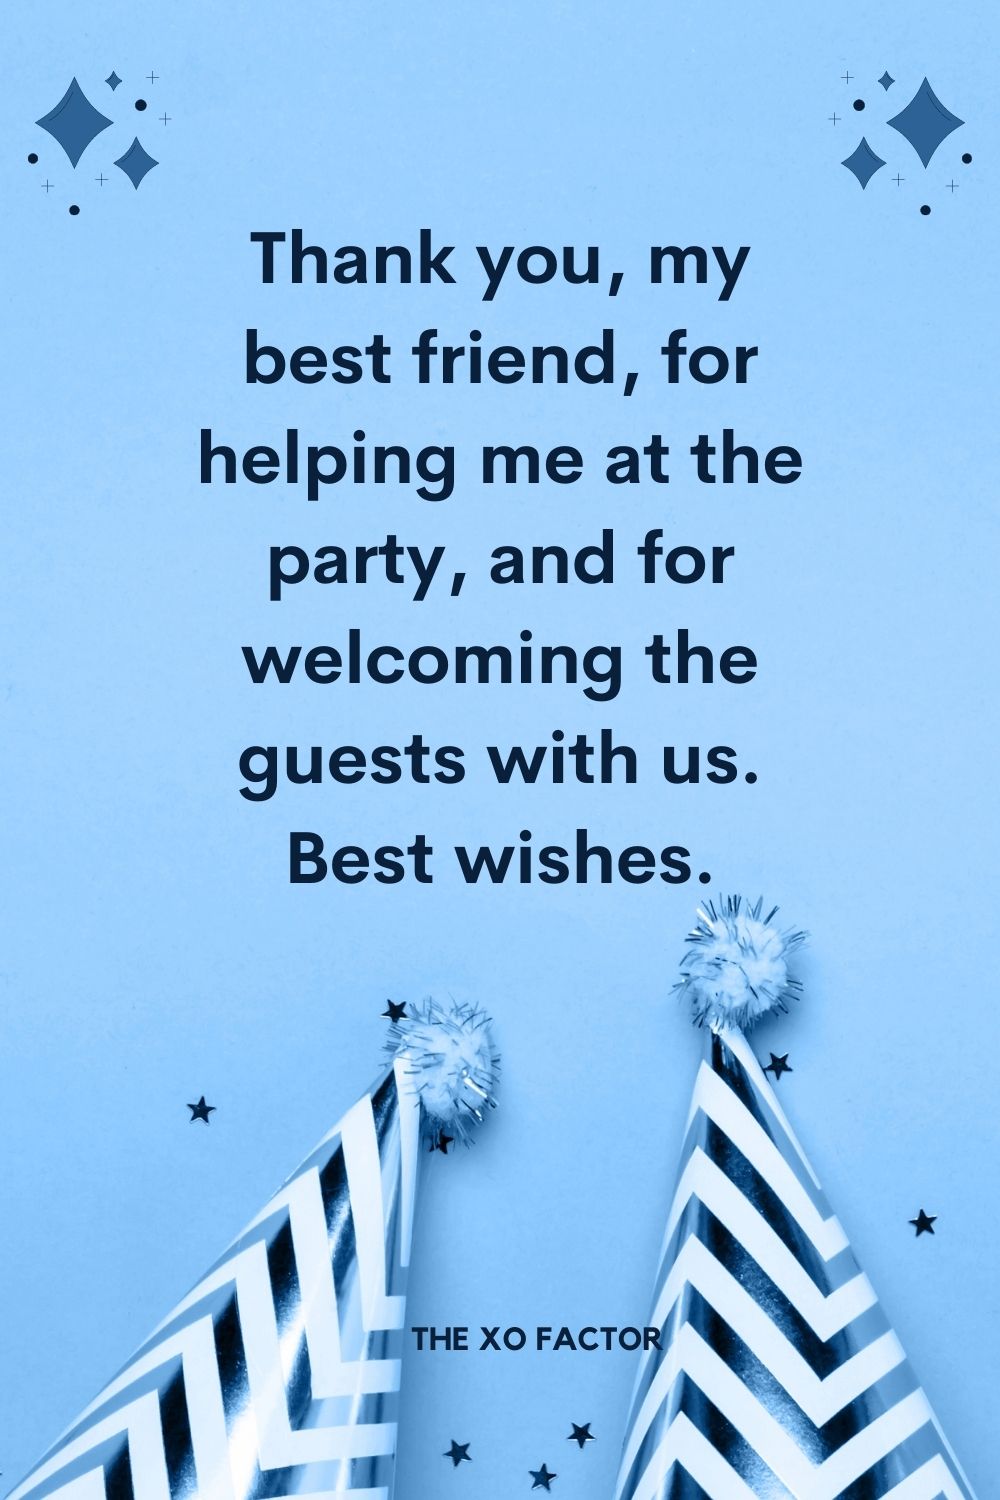 Thank you, my best friend, for helping me at the party, and for welcoming the guests with us. Best wishes.